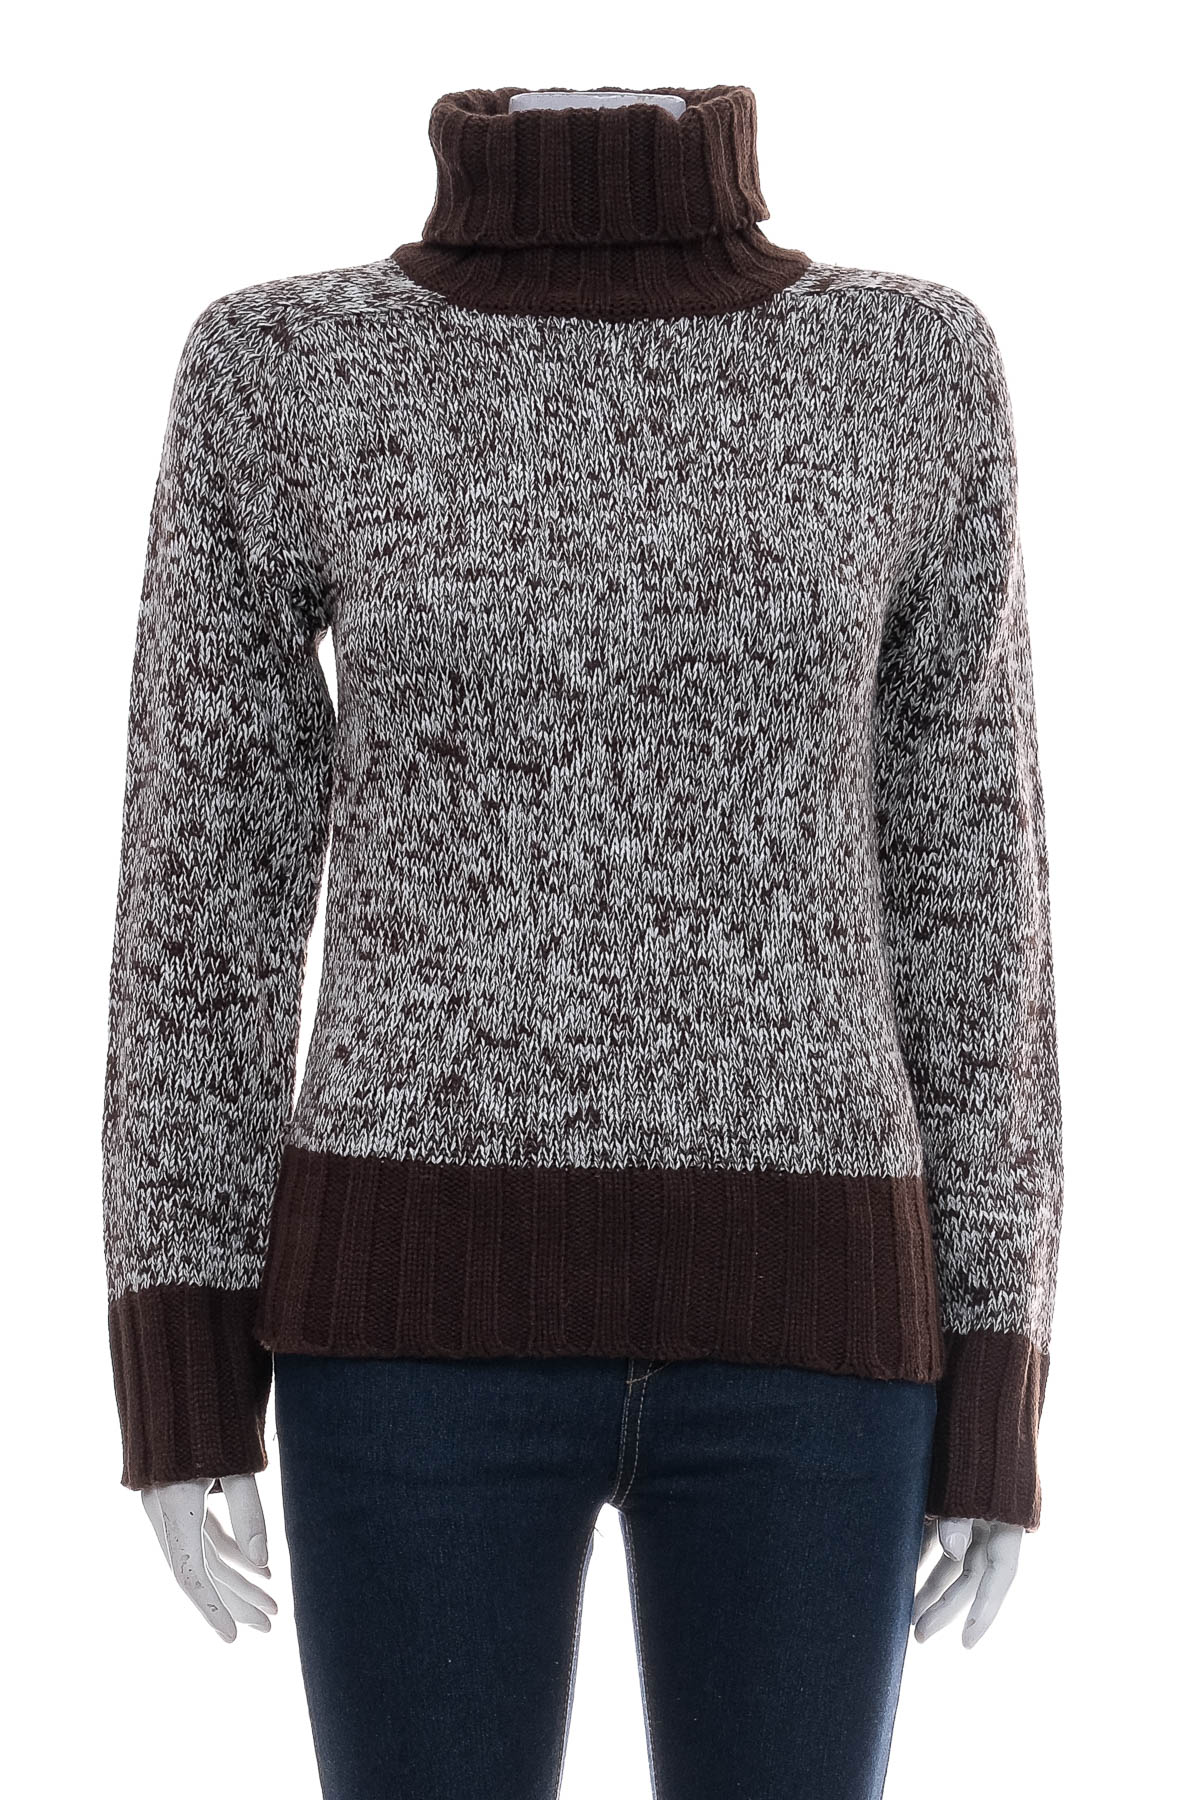 Women's sweater - Editions - 0